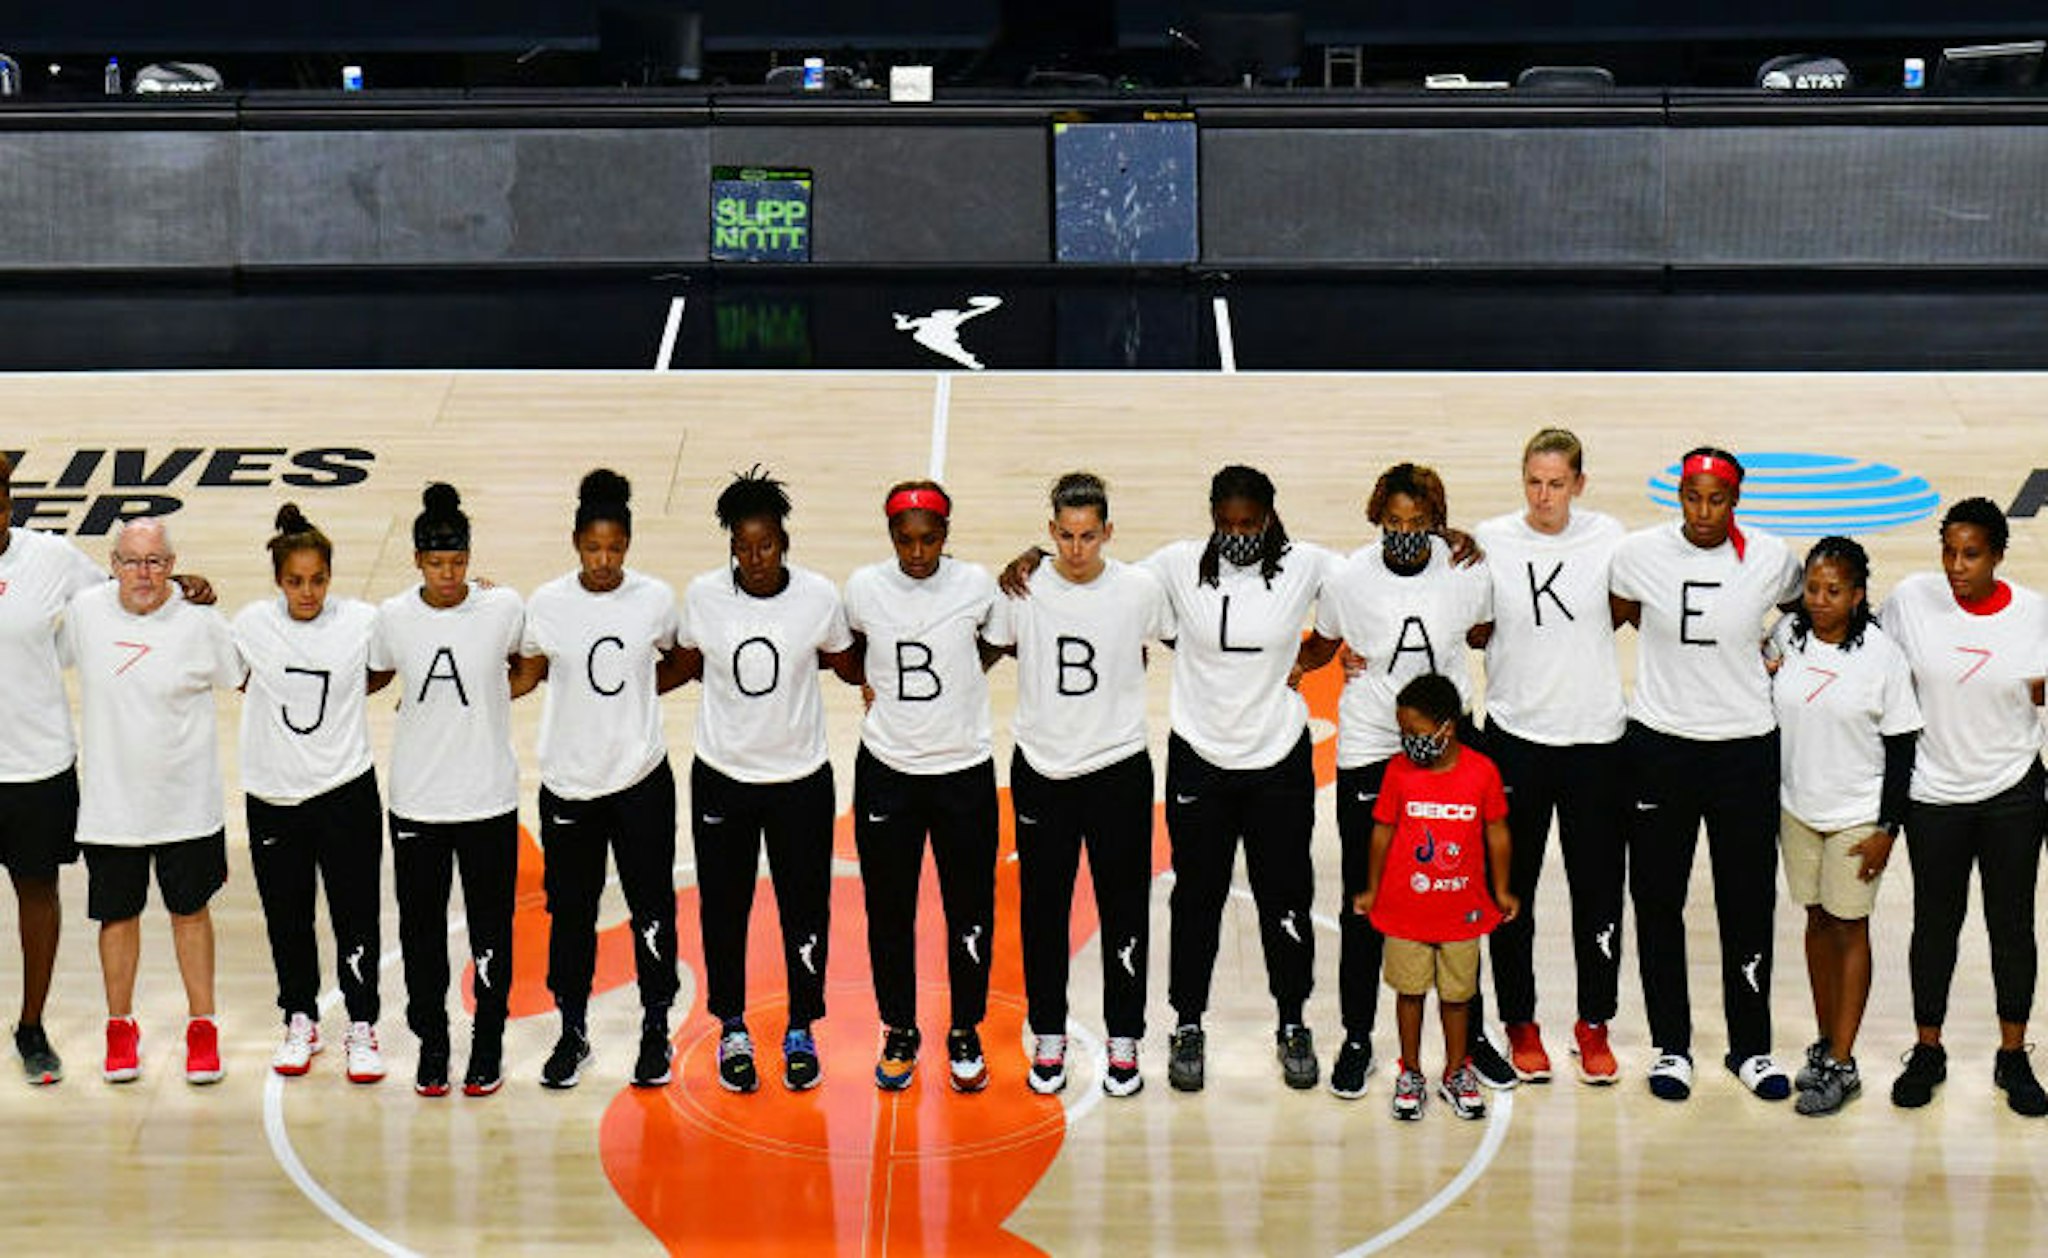 After the WNBA announcement of the postponed games for the evening, the Washington Mystics each wear white T-shirts with seven bullets on the back protesting the shooting of Jacob Blake by Kenosha, Wisconsin police at Feld Entertainment Center on August 26, 2020 in Palmetto, Florida. NOTE TO USER: User expressly acknowledges and agrees that, by downloading and or using this photograph, User is consenting to the terms and conditions of the Getty Images License Agreement. (Photo by Julio Aguilar/Getty Images)